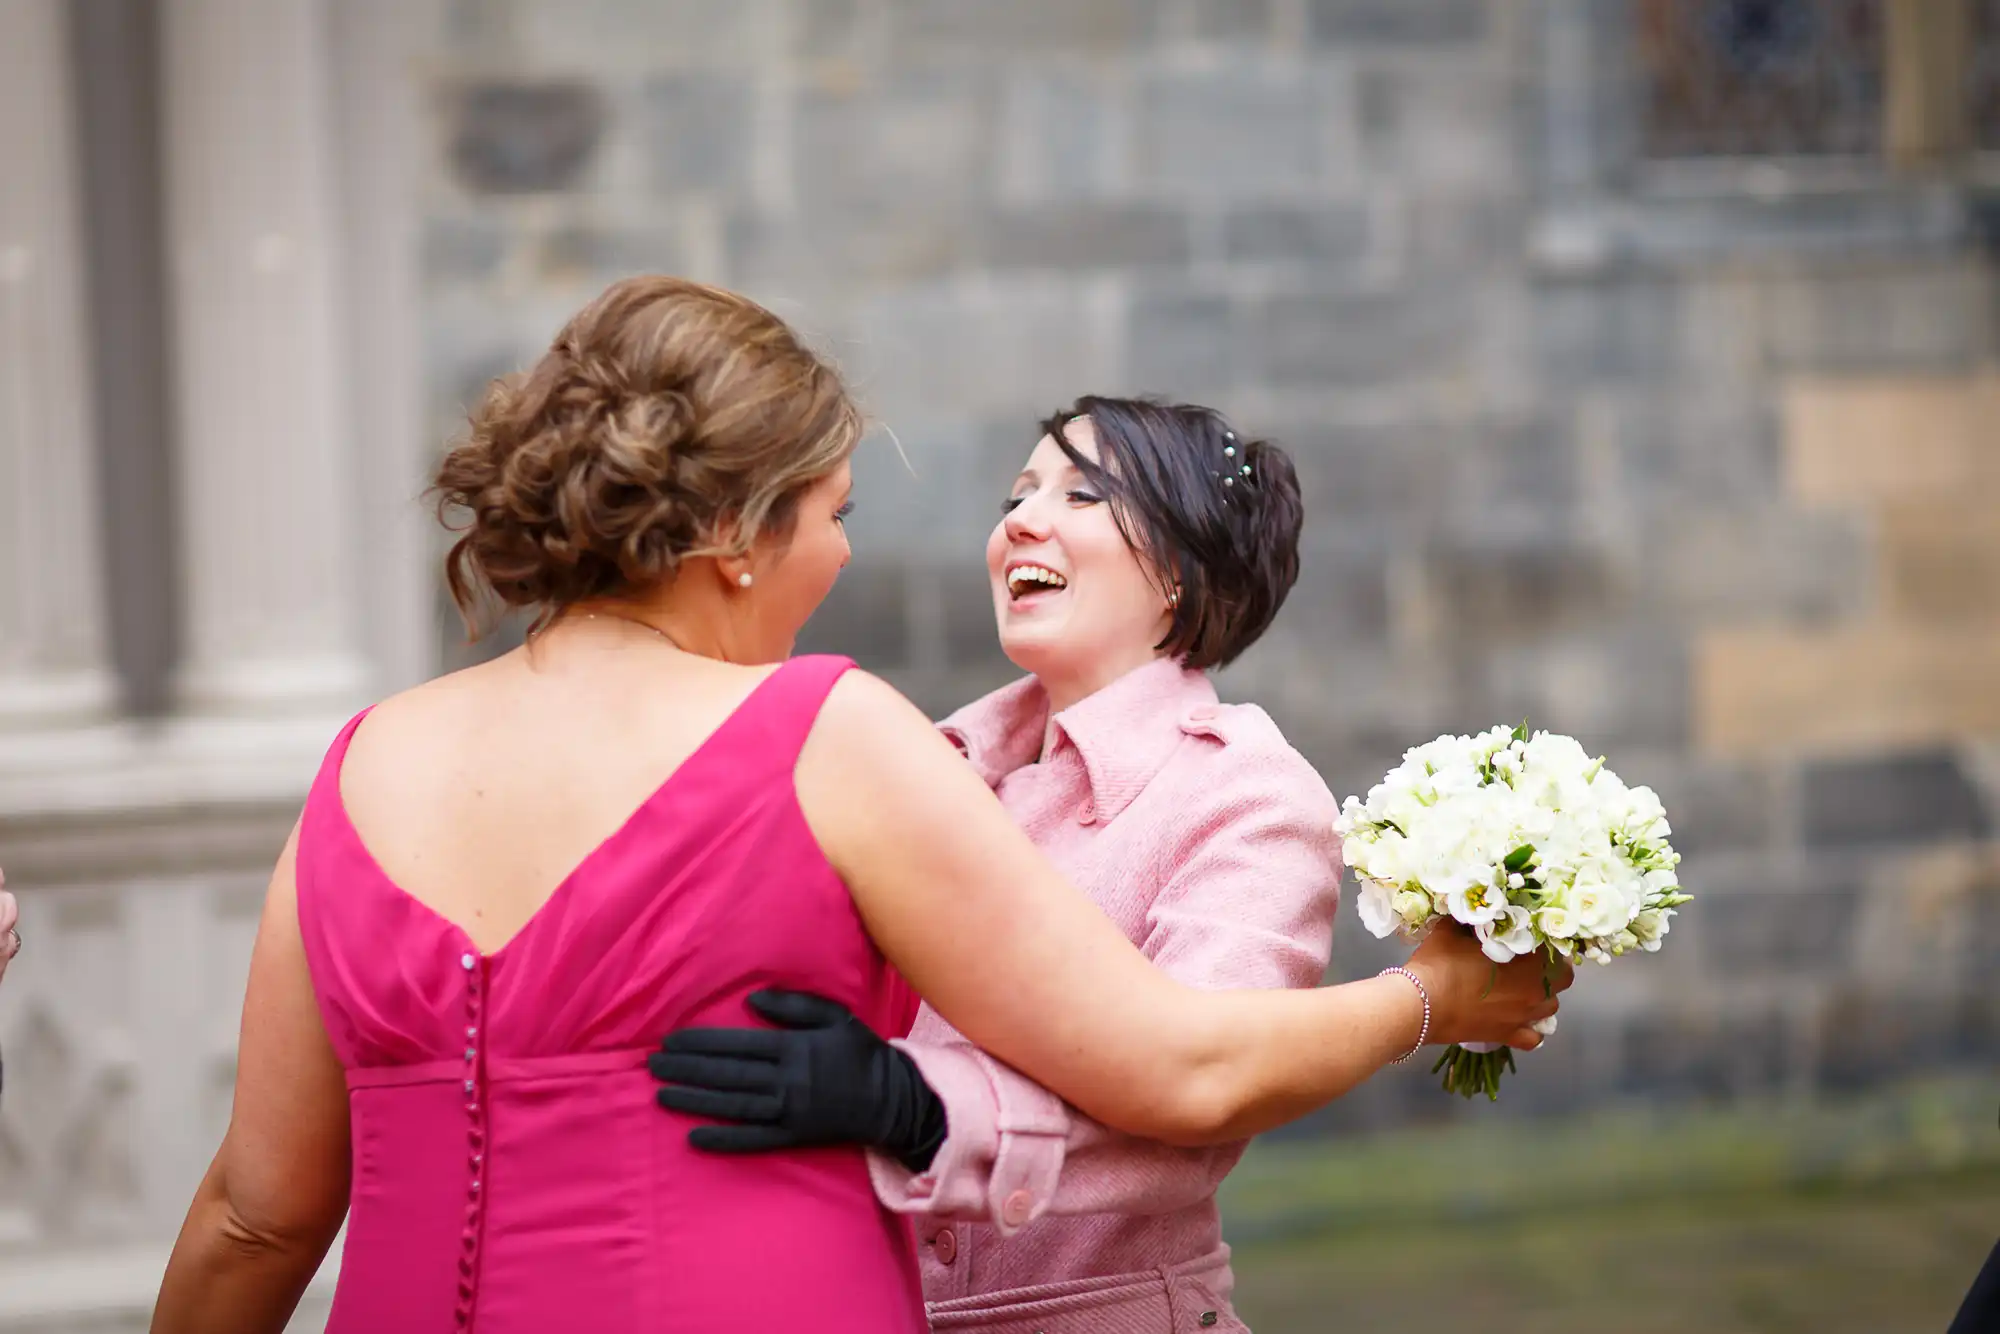 Two women in formal attire hugging and laughing joyously, one holding a bouquet, outside a historical building.